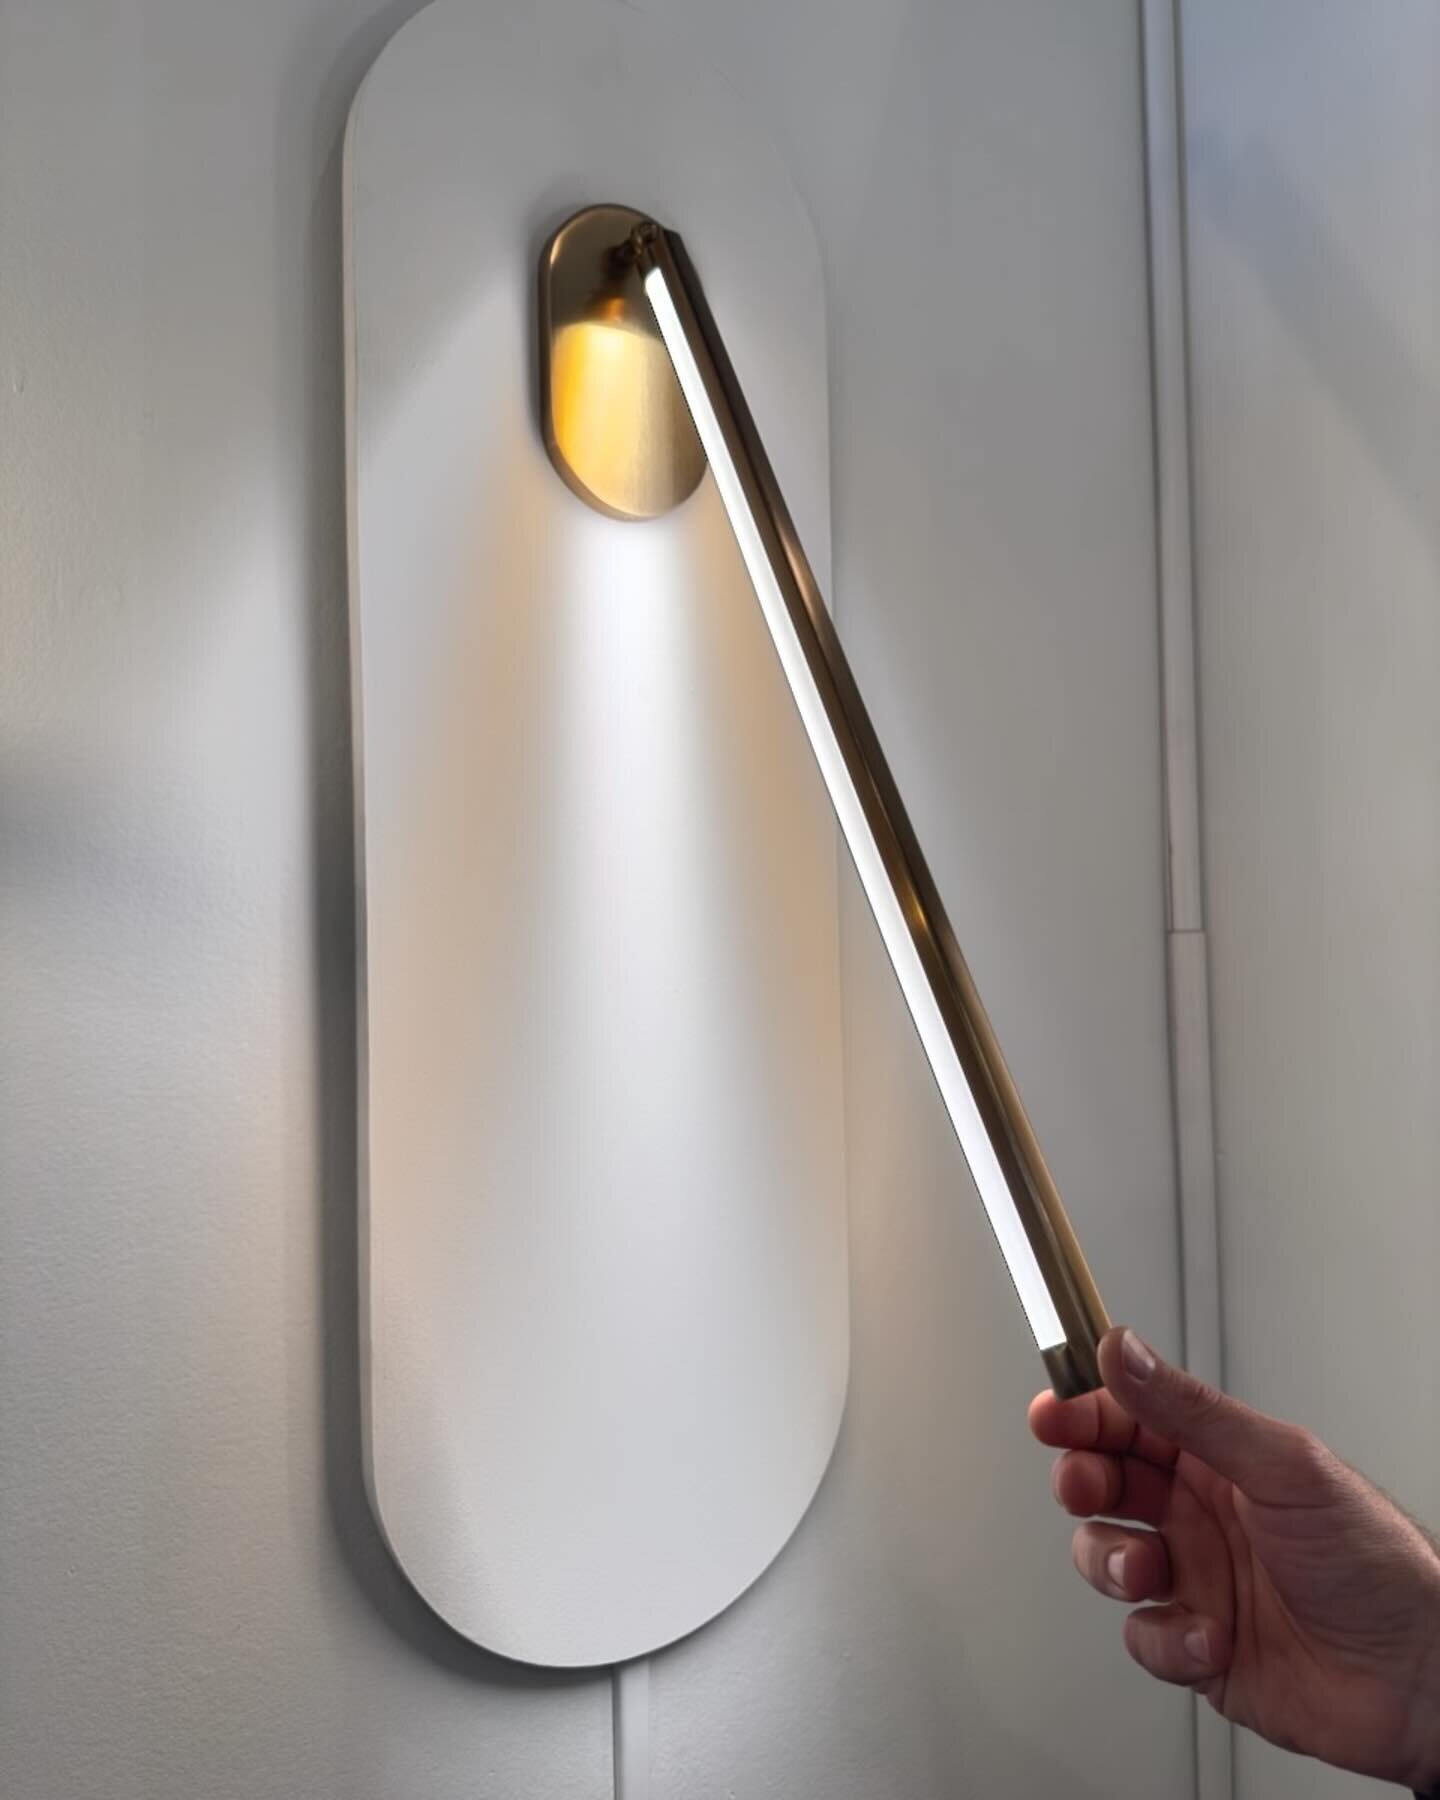 New products are so exciting take a look at this stunning light fixture.  Ray Slim Wall Sconce from Ridgely Studio Works. This is one of @cozystylishchic top picks from the Westedge 2023 design convention.
.
@thenkba @kbis_official 
📸 by Jeanne Chun